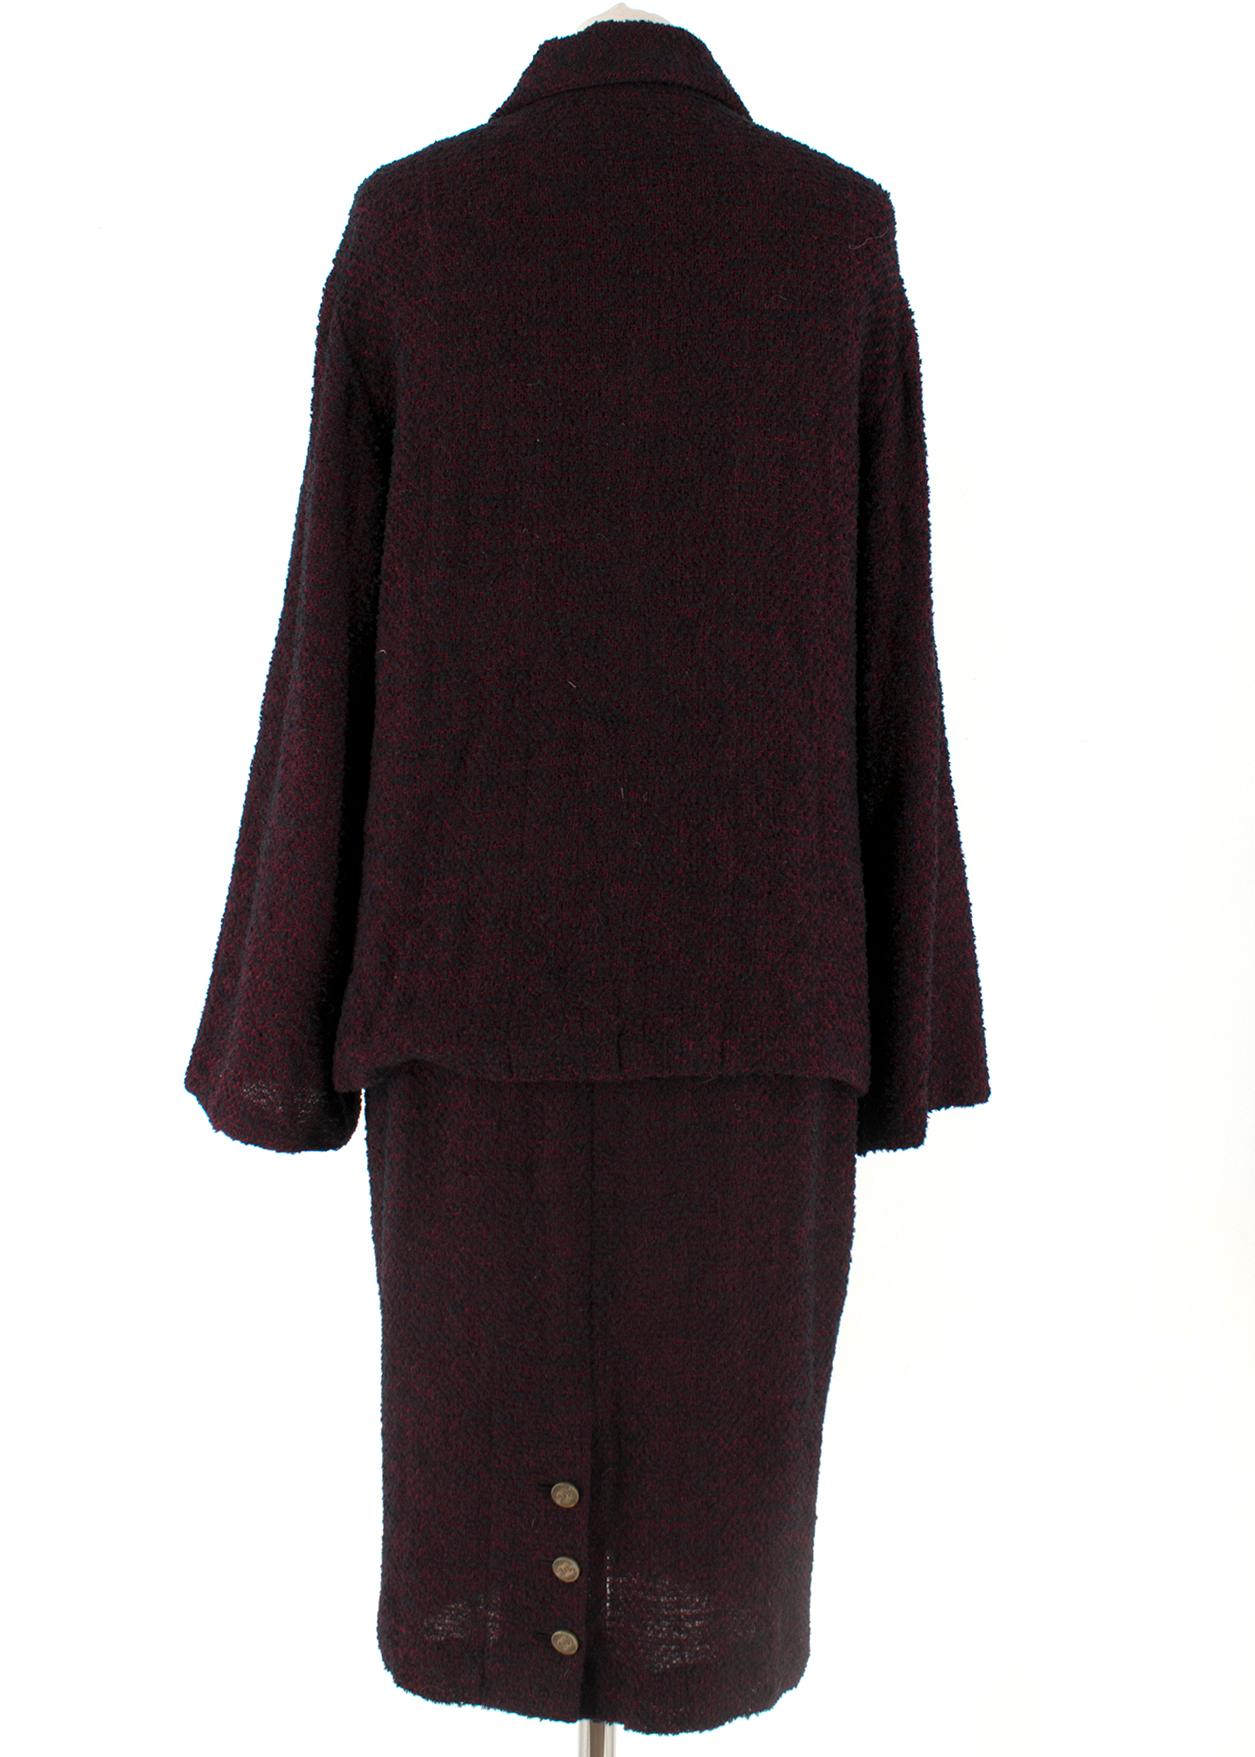 Chanel Vintage Burgundy Tweed Suit - Size US 4 In Excellent Condition For Sale In London, GB